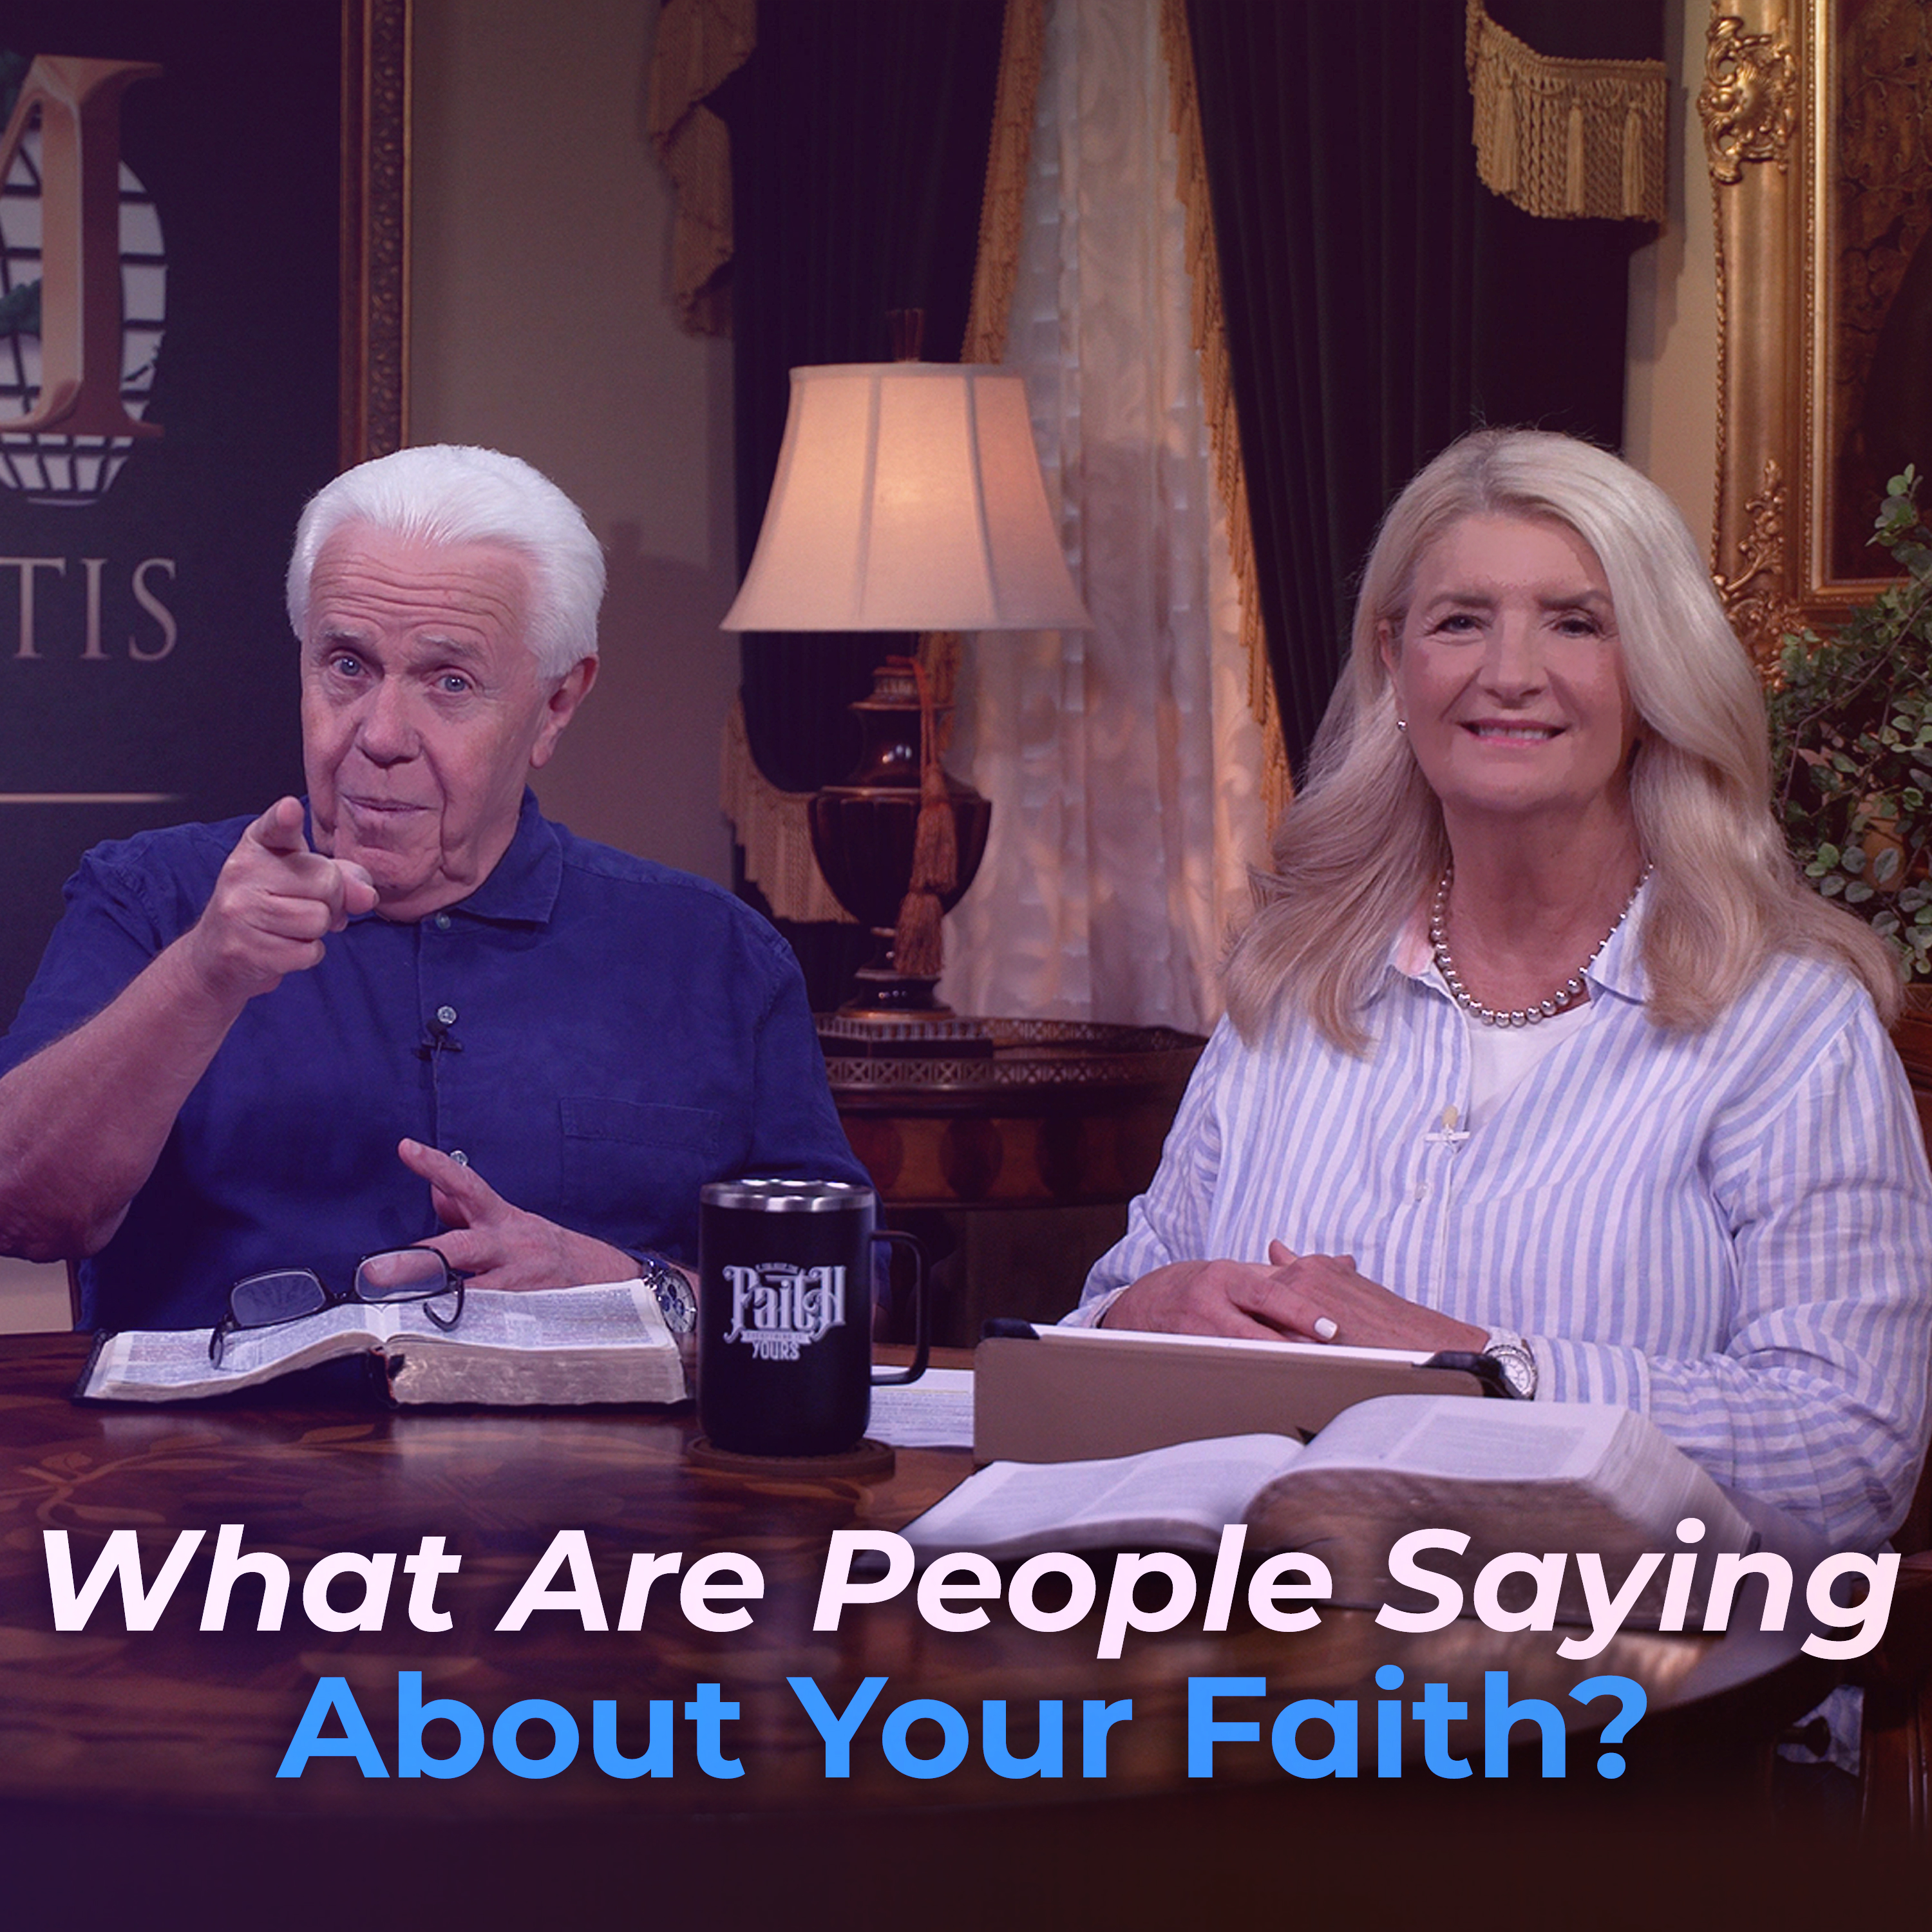 What Are People Saying About Your Faith?